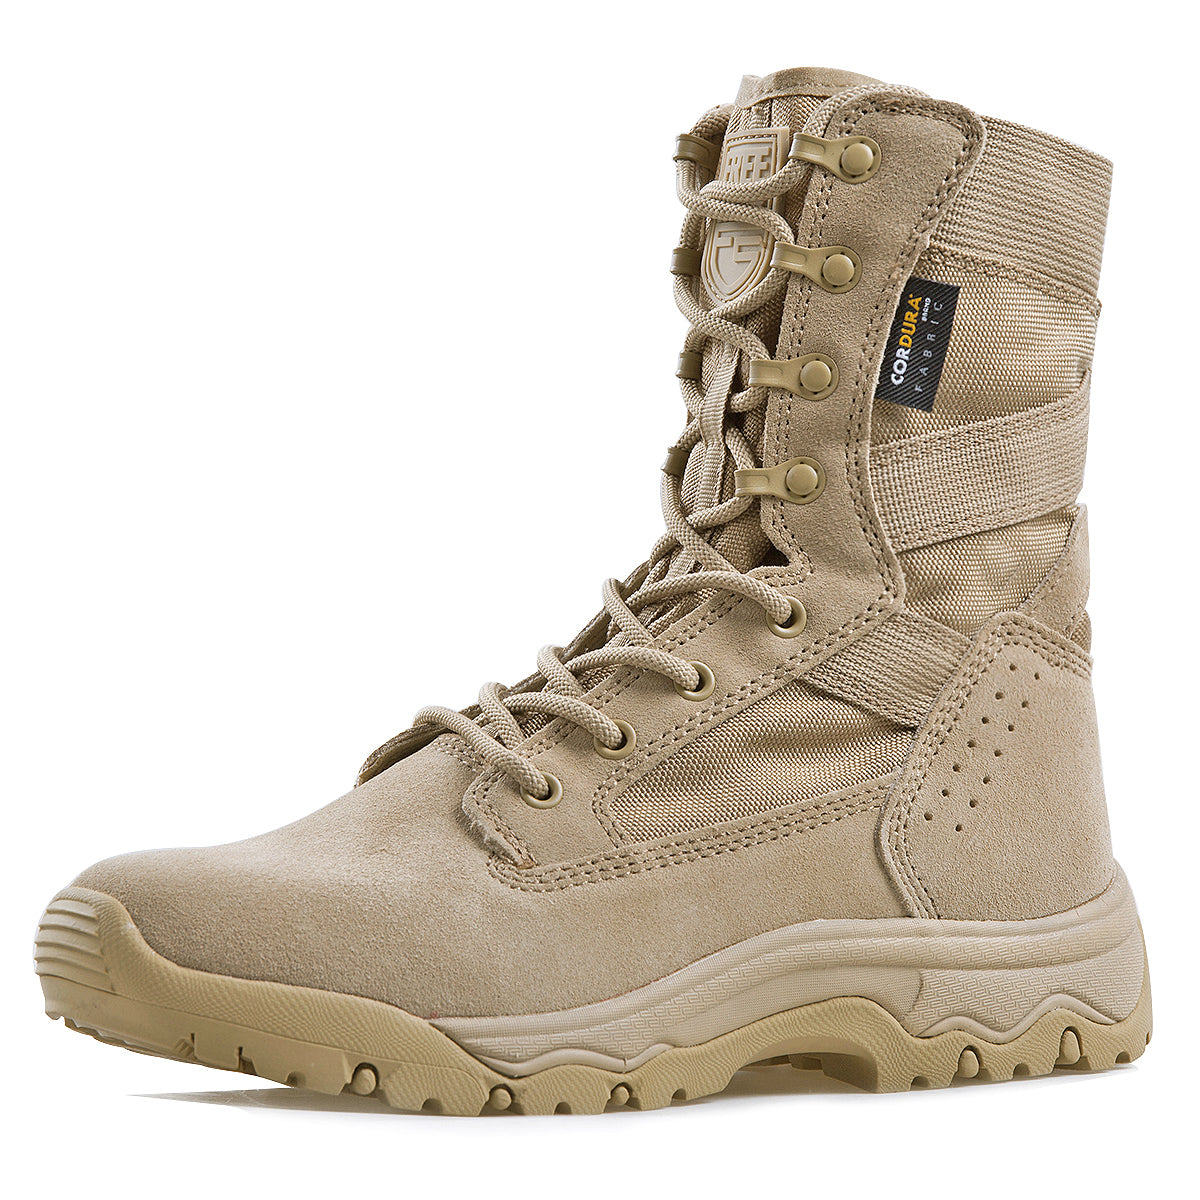 FREE SOLDIER Mens Tactical Boots 6 Inches Lightweight Combat Boots Durable Hiking Boots Military Desert Boots 